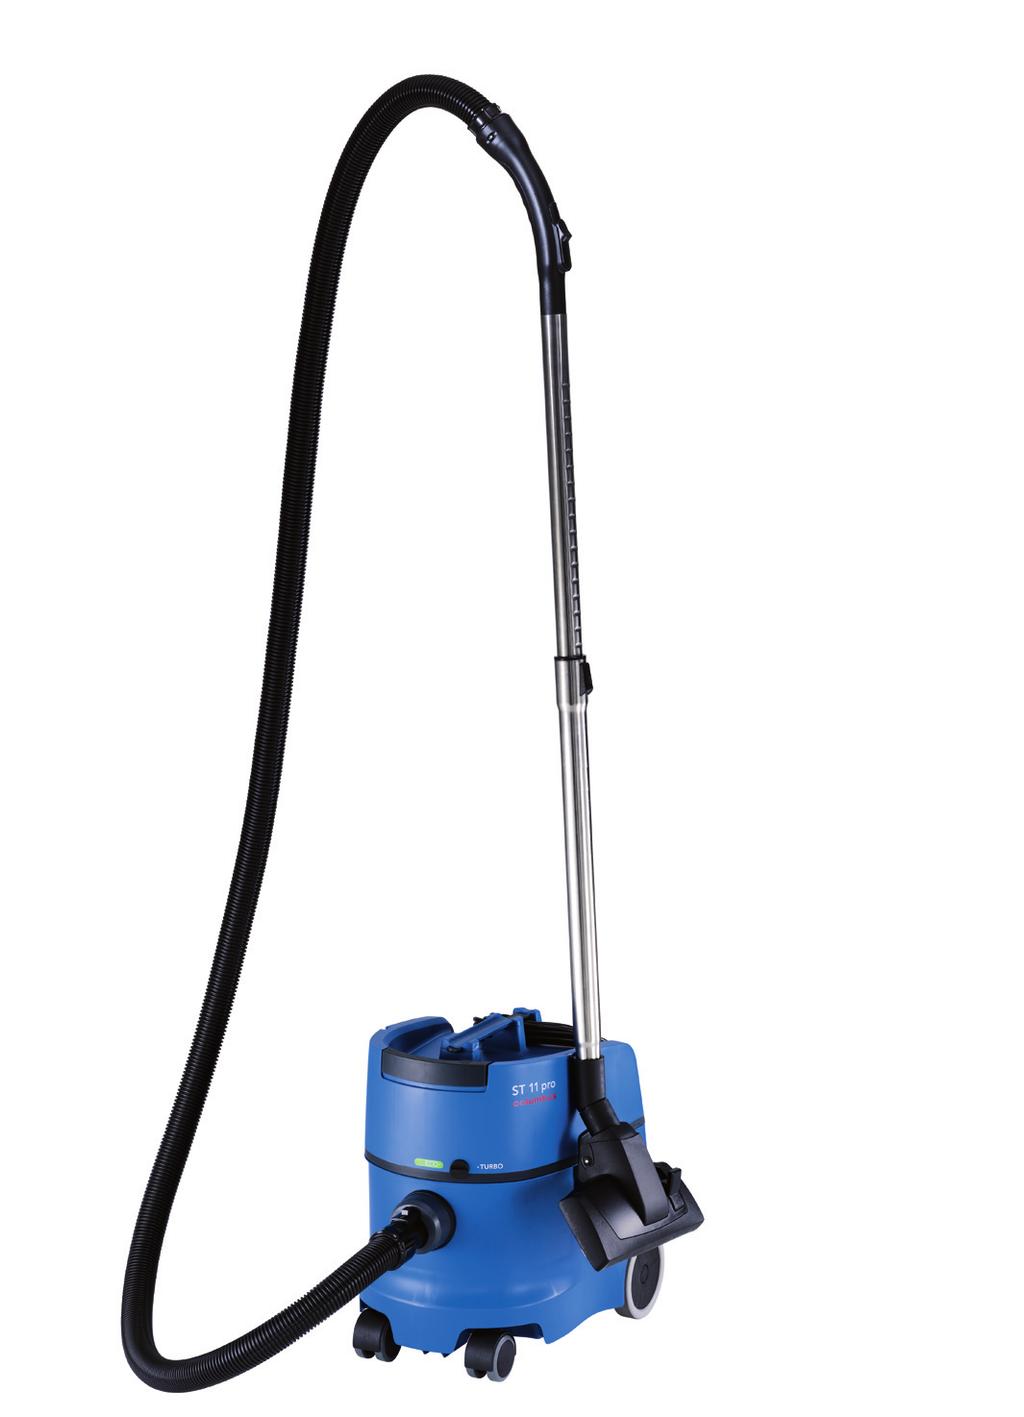 More economic: WITH "ECO" FUNCTION St 11 pro ST 11 pro The all-round Model in a compact design and with a large 11 litre fleece filter bag for professional use on hard floors and textile surfaces.